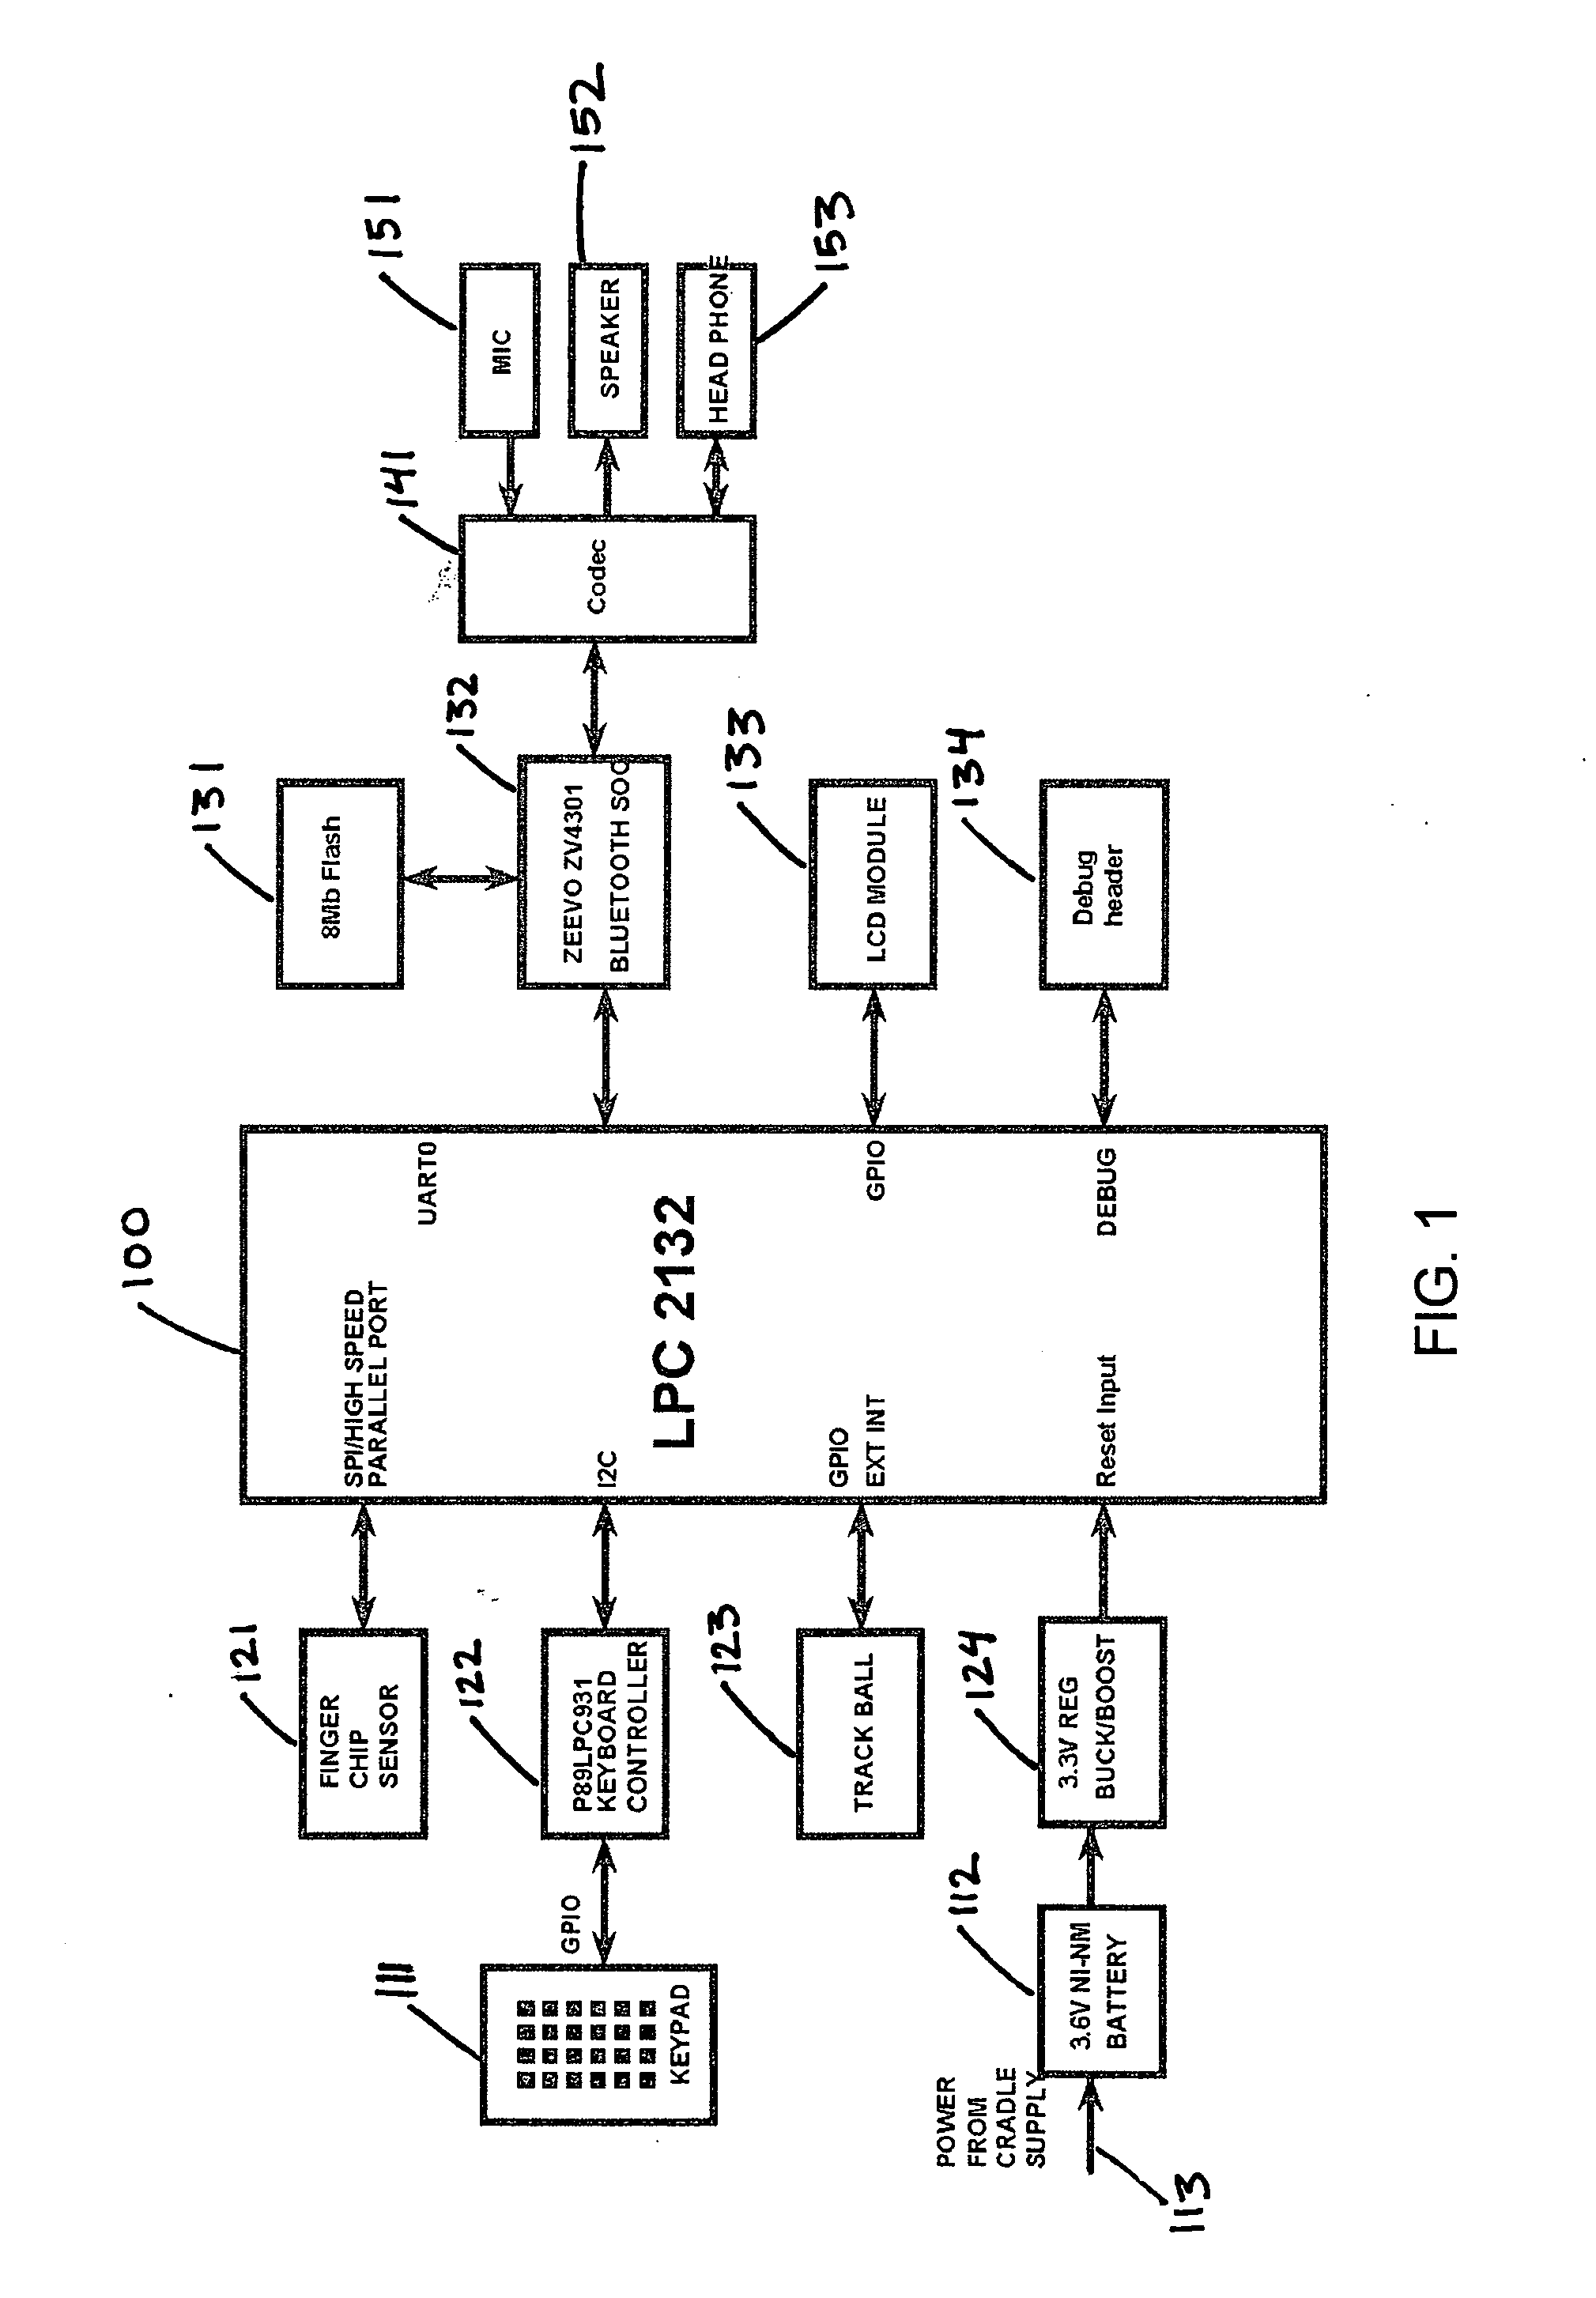 Tethered digital butler consumer electronic device and method